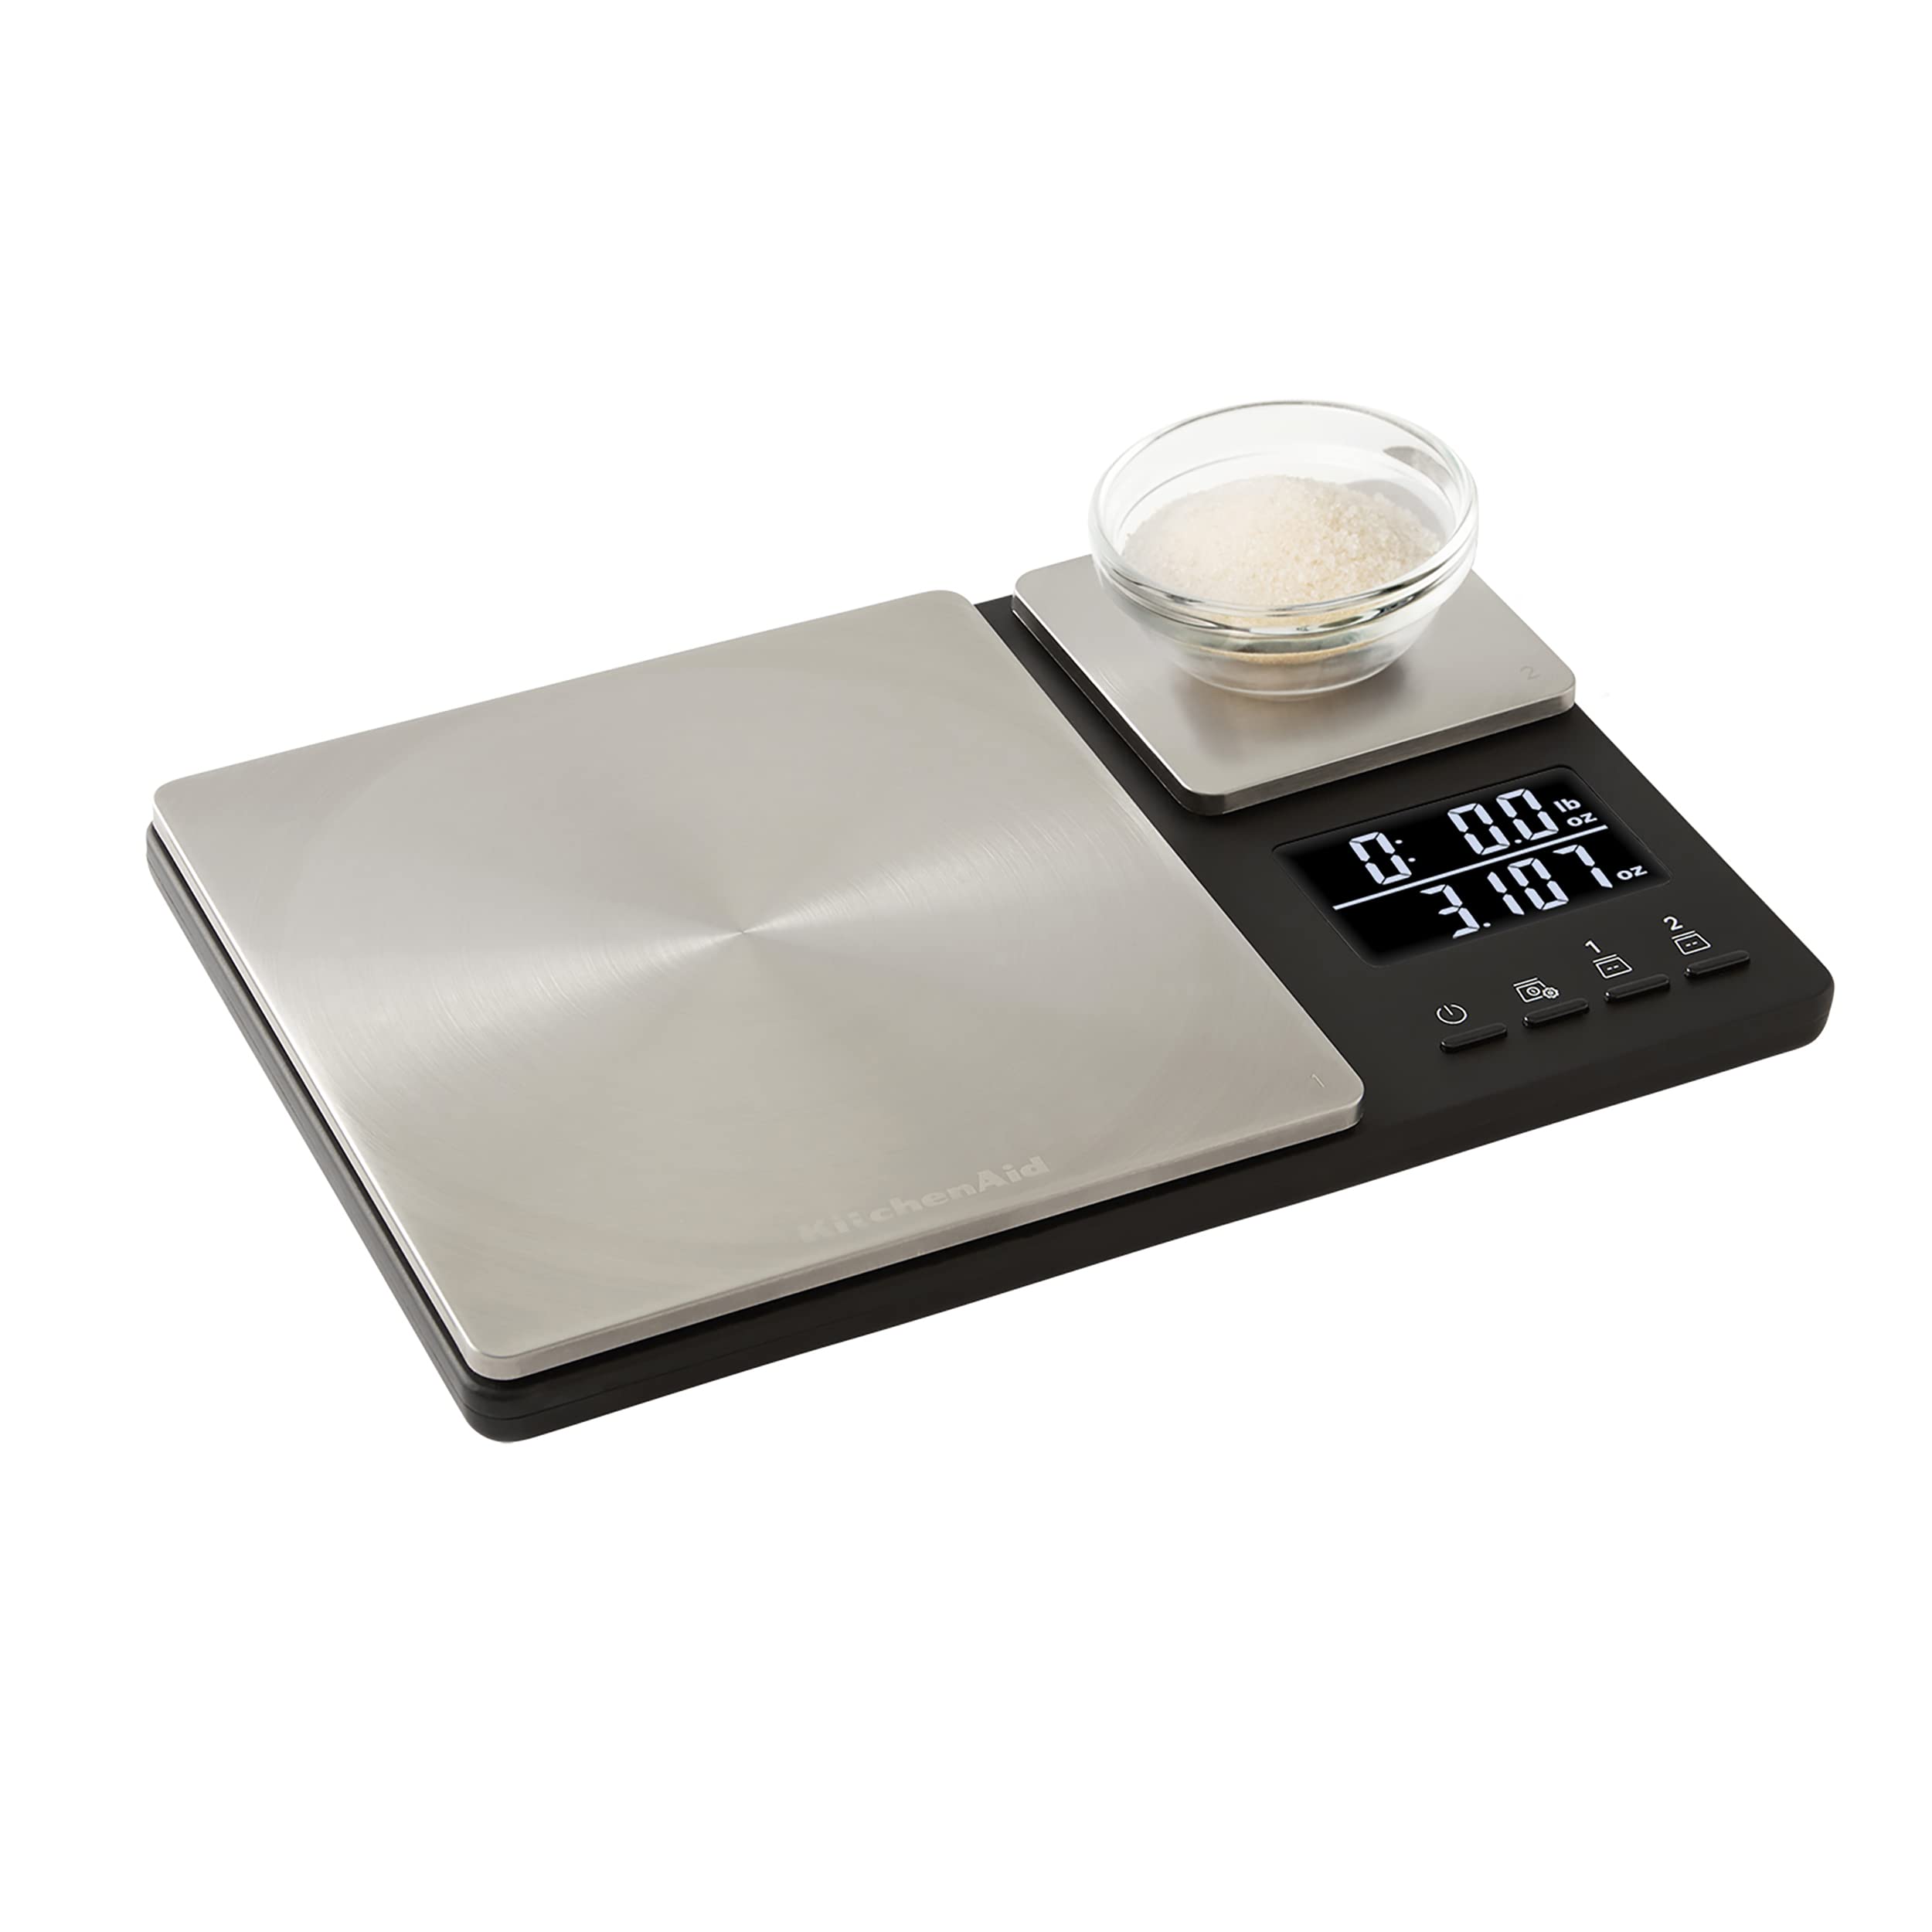 KitchenAid KQ909 Dual Platform Digital Kitchen and Food Scale, 11 pound capacity and Precision 16oz capacity, Black with Stainless Steel